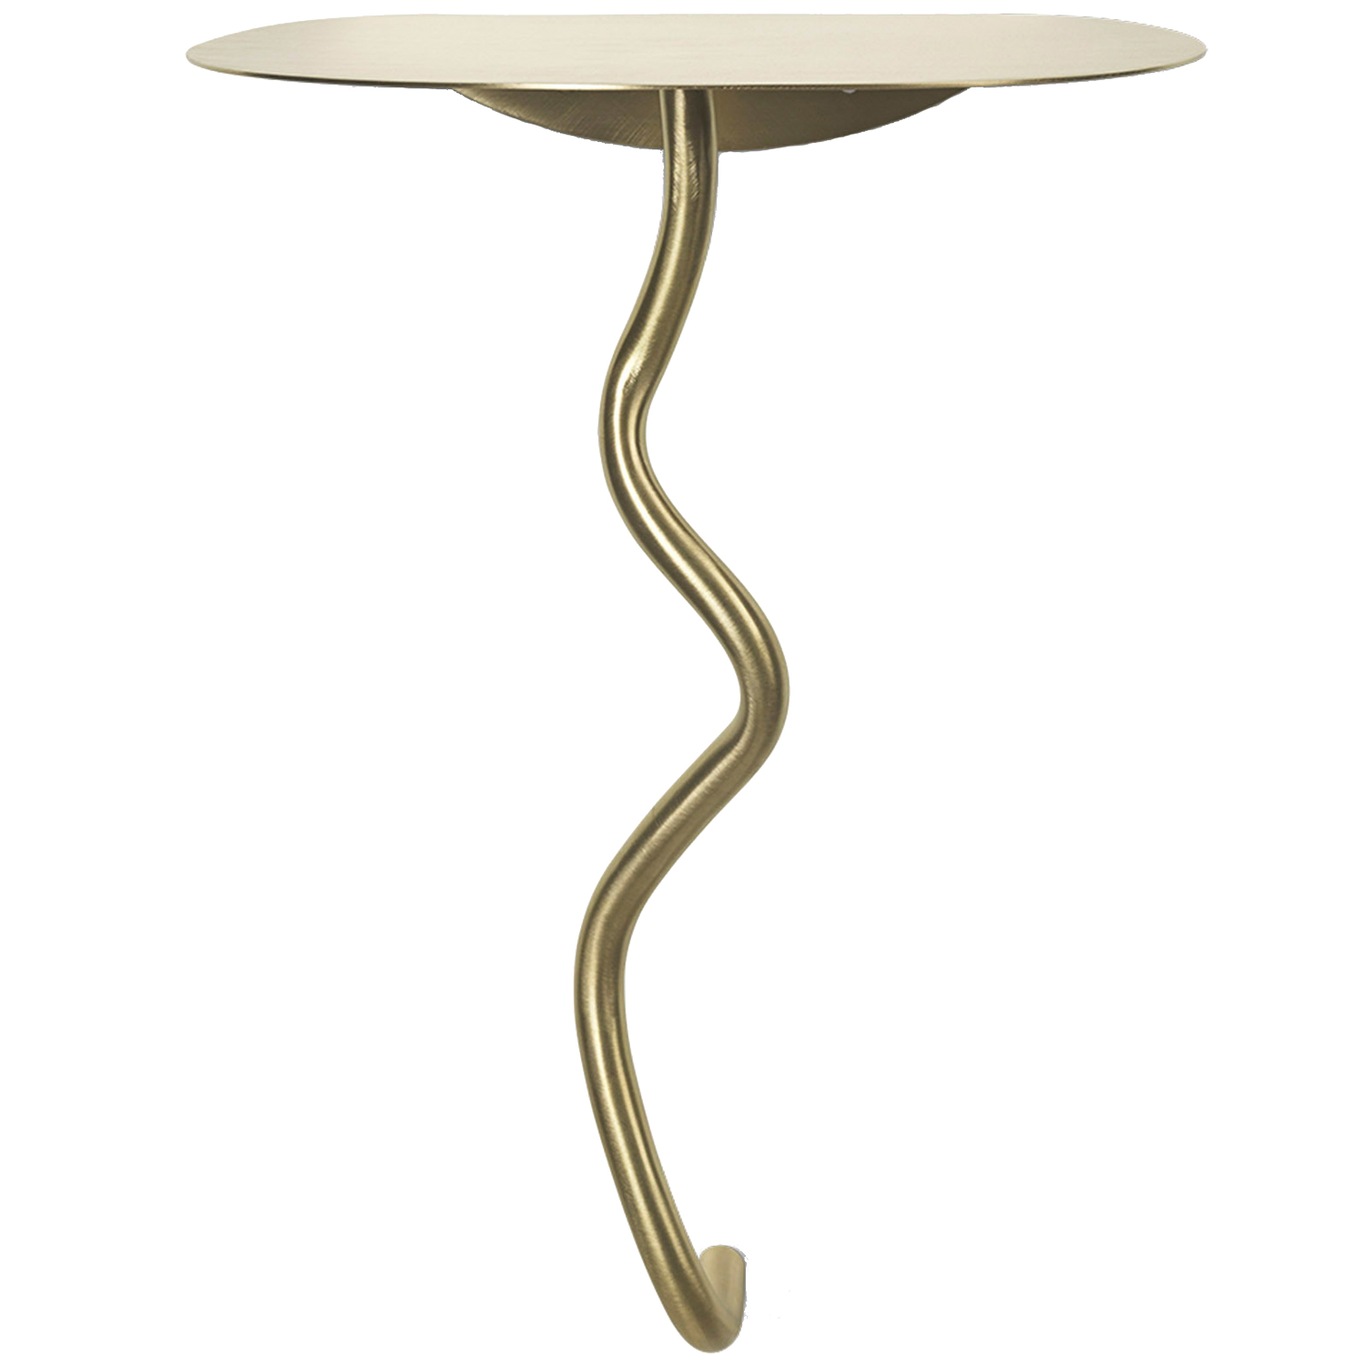 Curvature Wall Table- Black Brass Bord, Messing